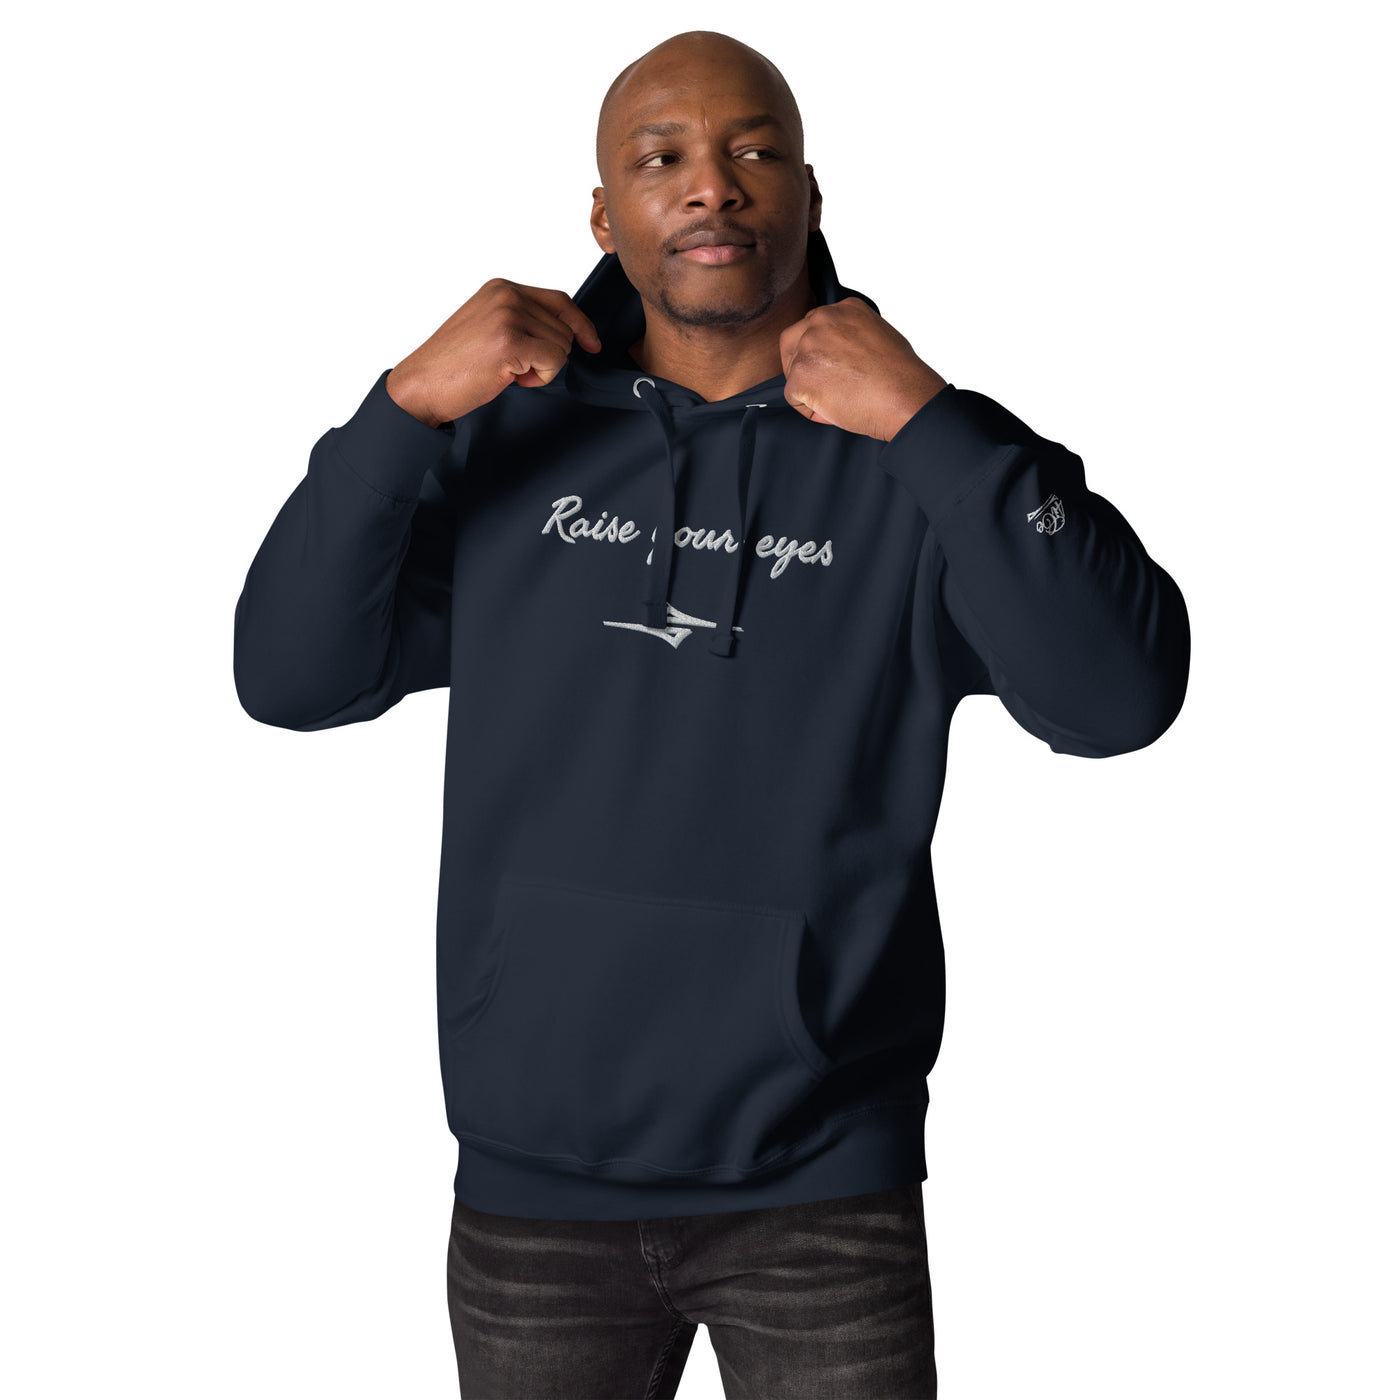 4iCe® Raise your eyes Elite Boxing embroidered hoodie